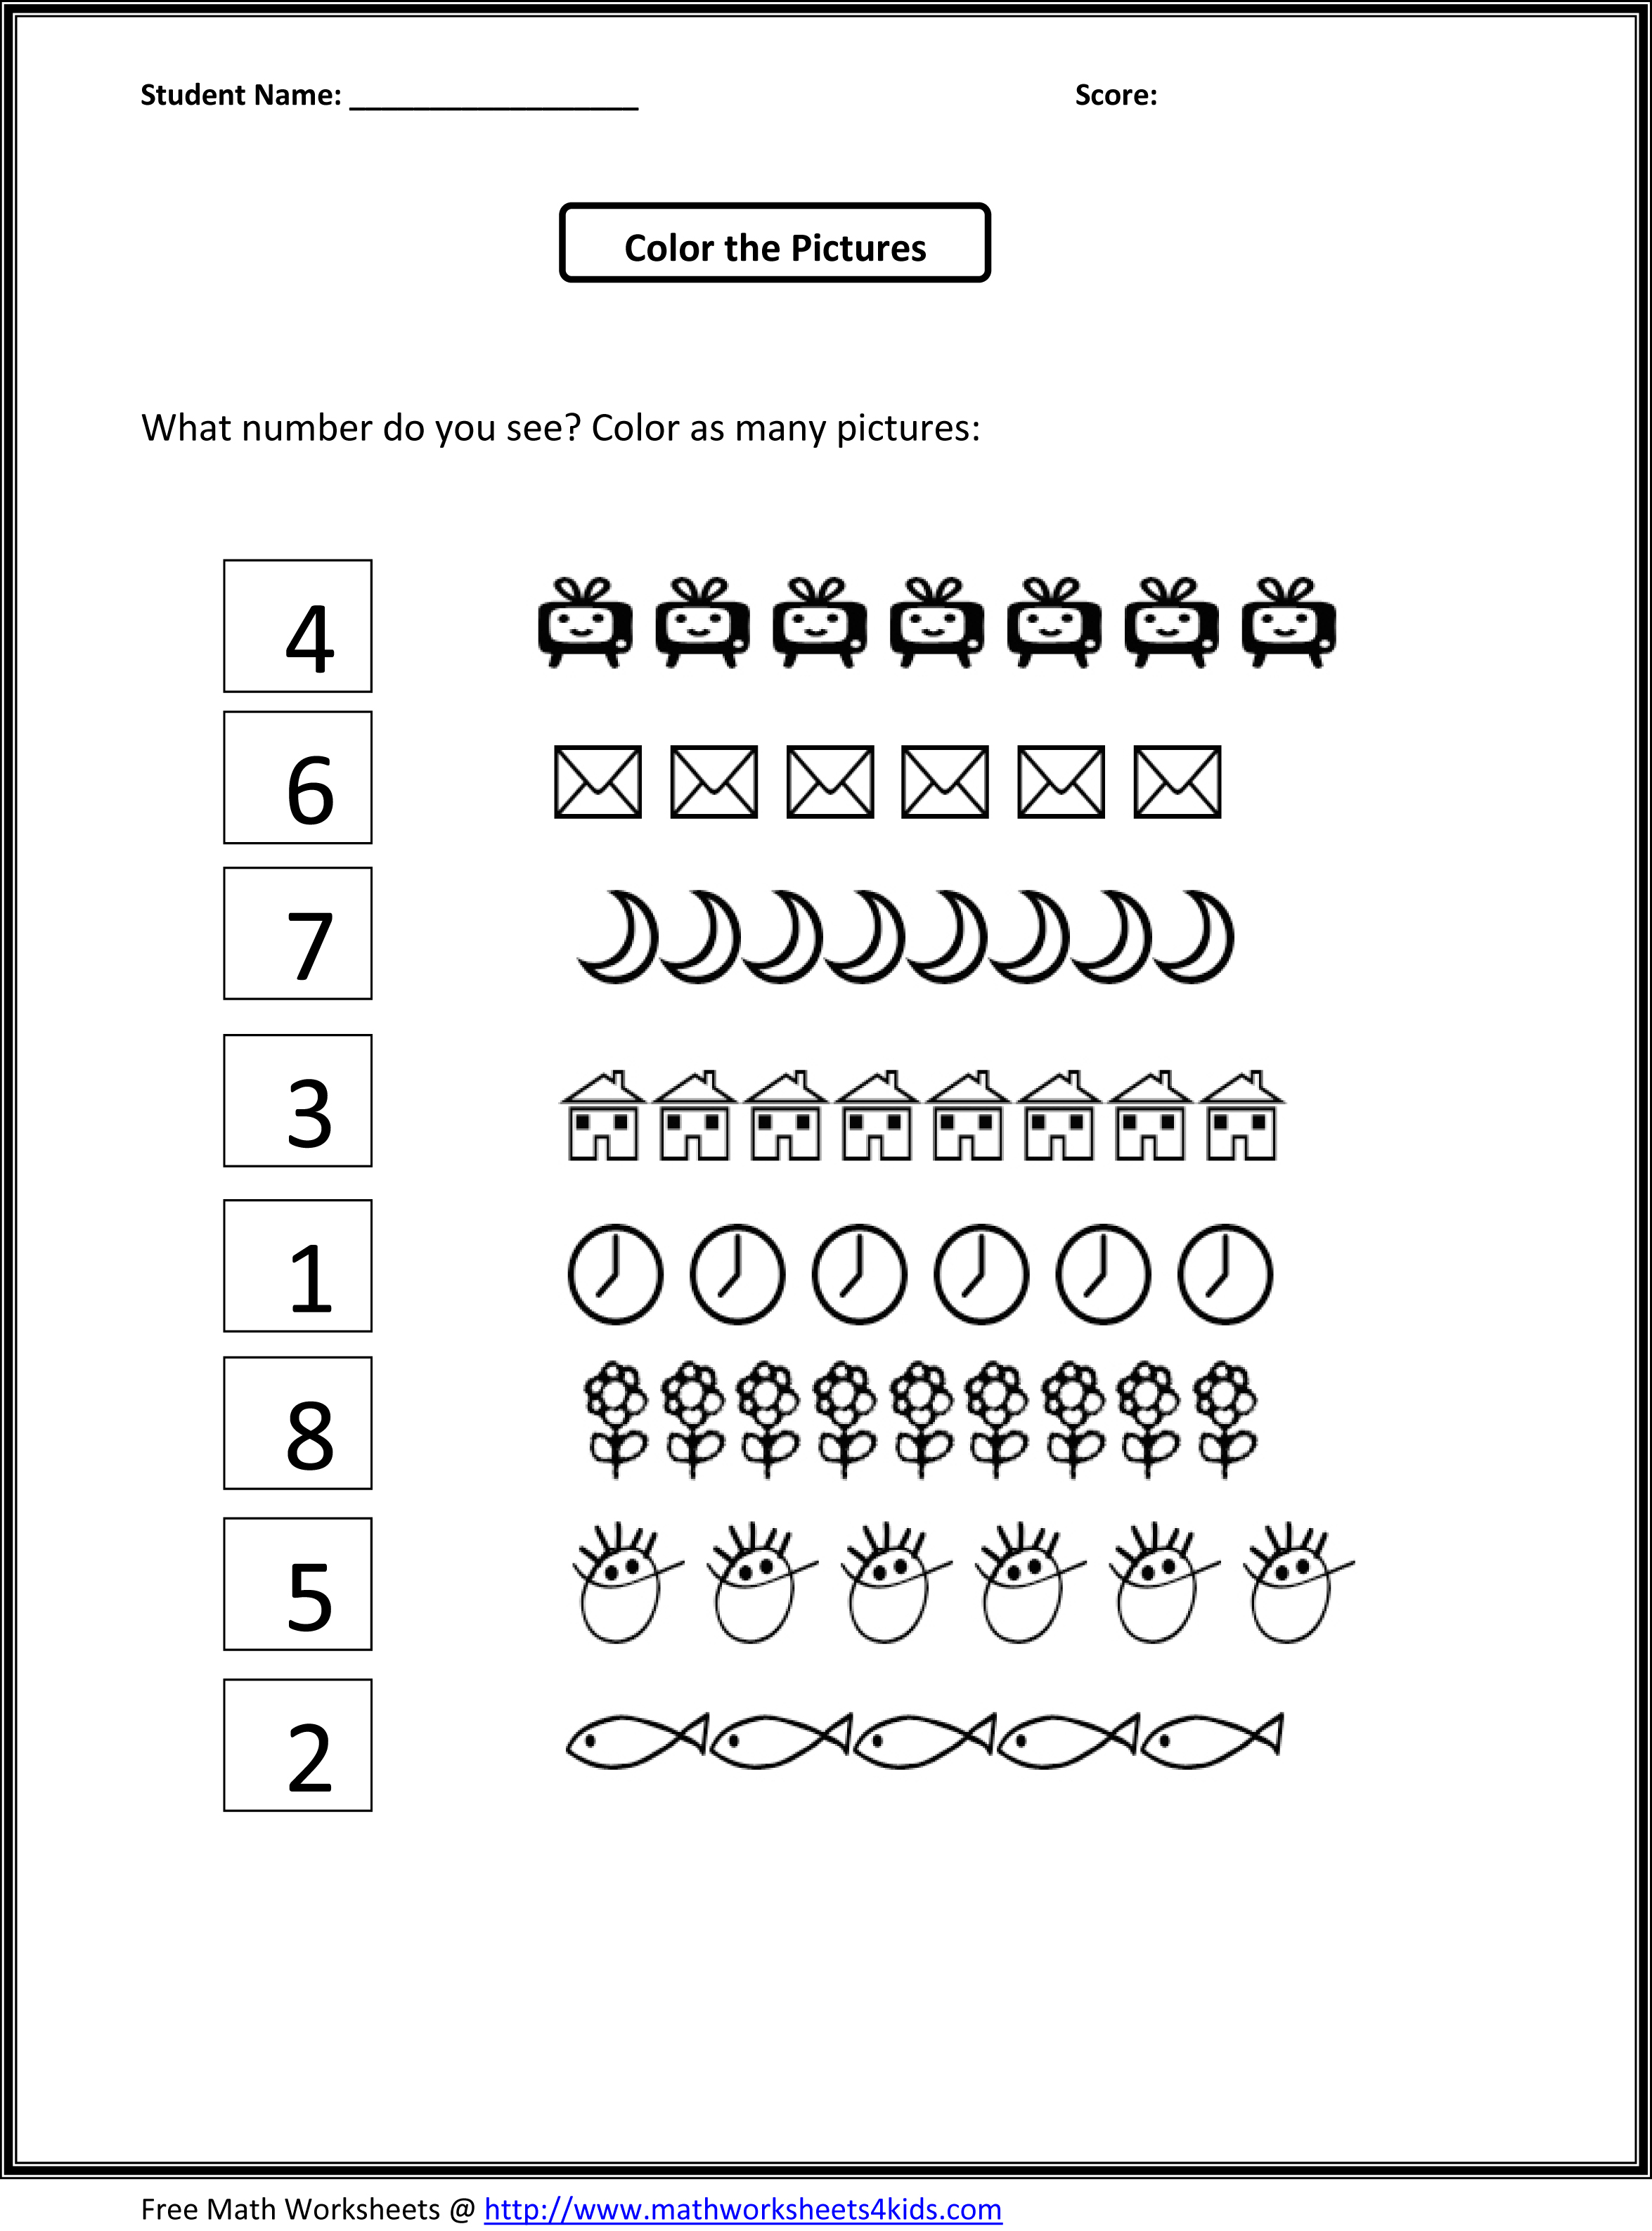 19-best-images-of-counting-numbers-worksheets-counting-objects-to-20